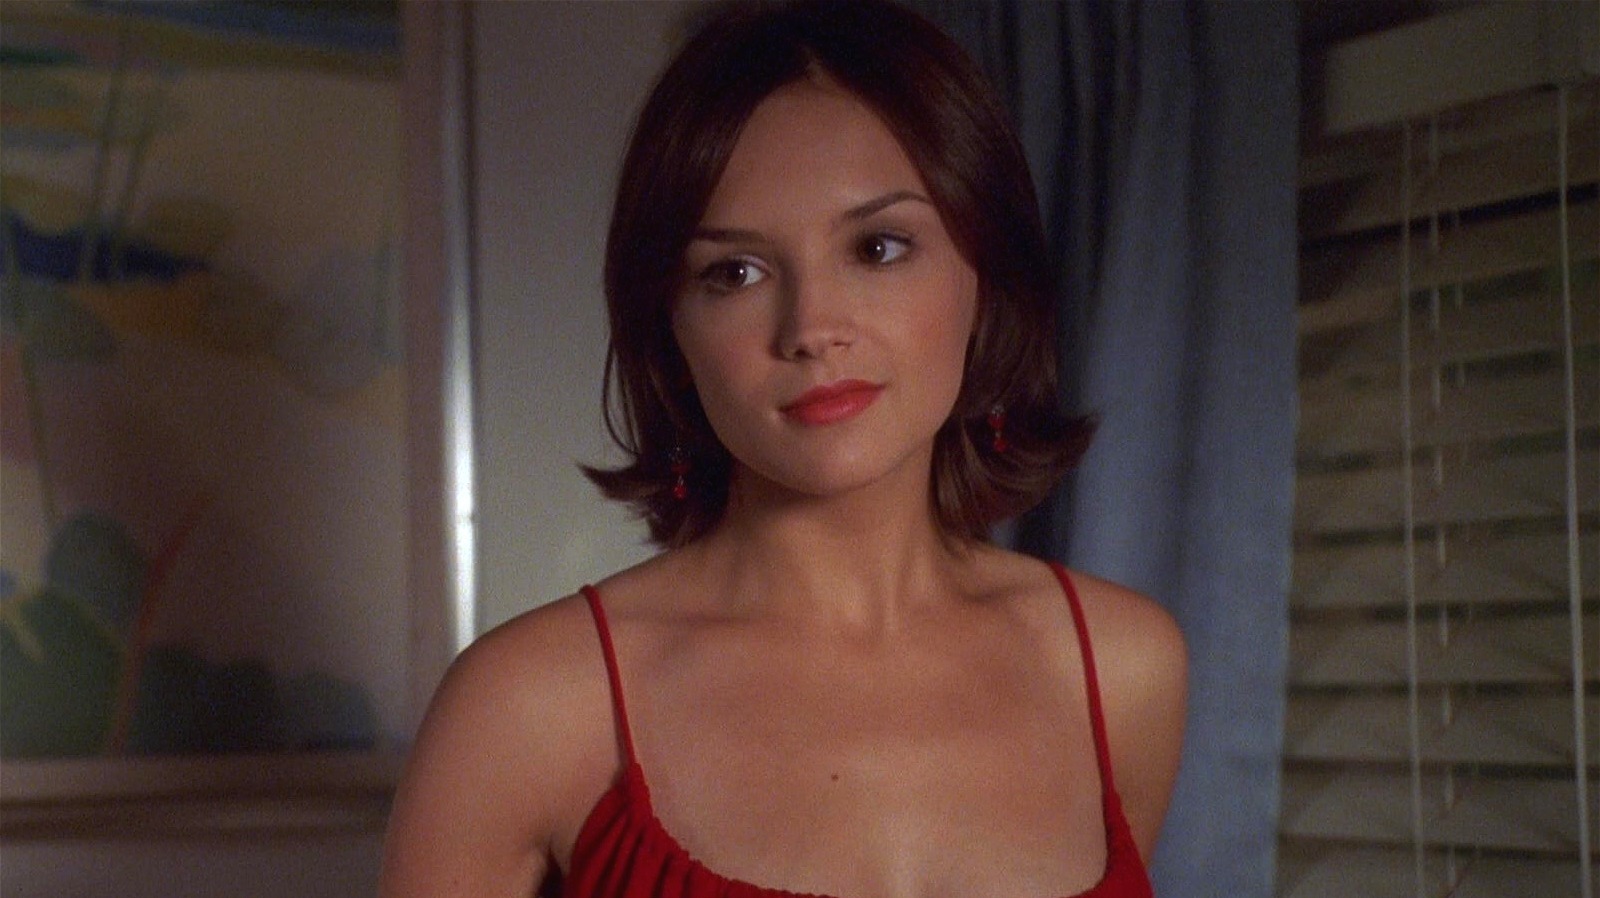 devendra dhonde add photo rachael leigh cook topless